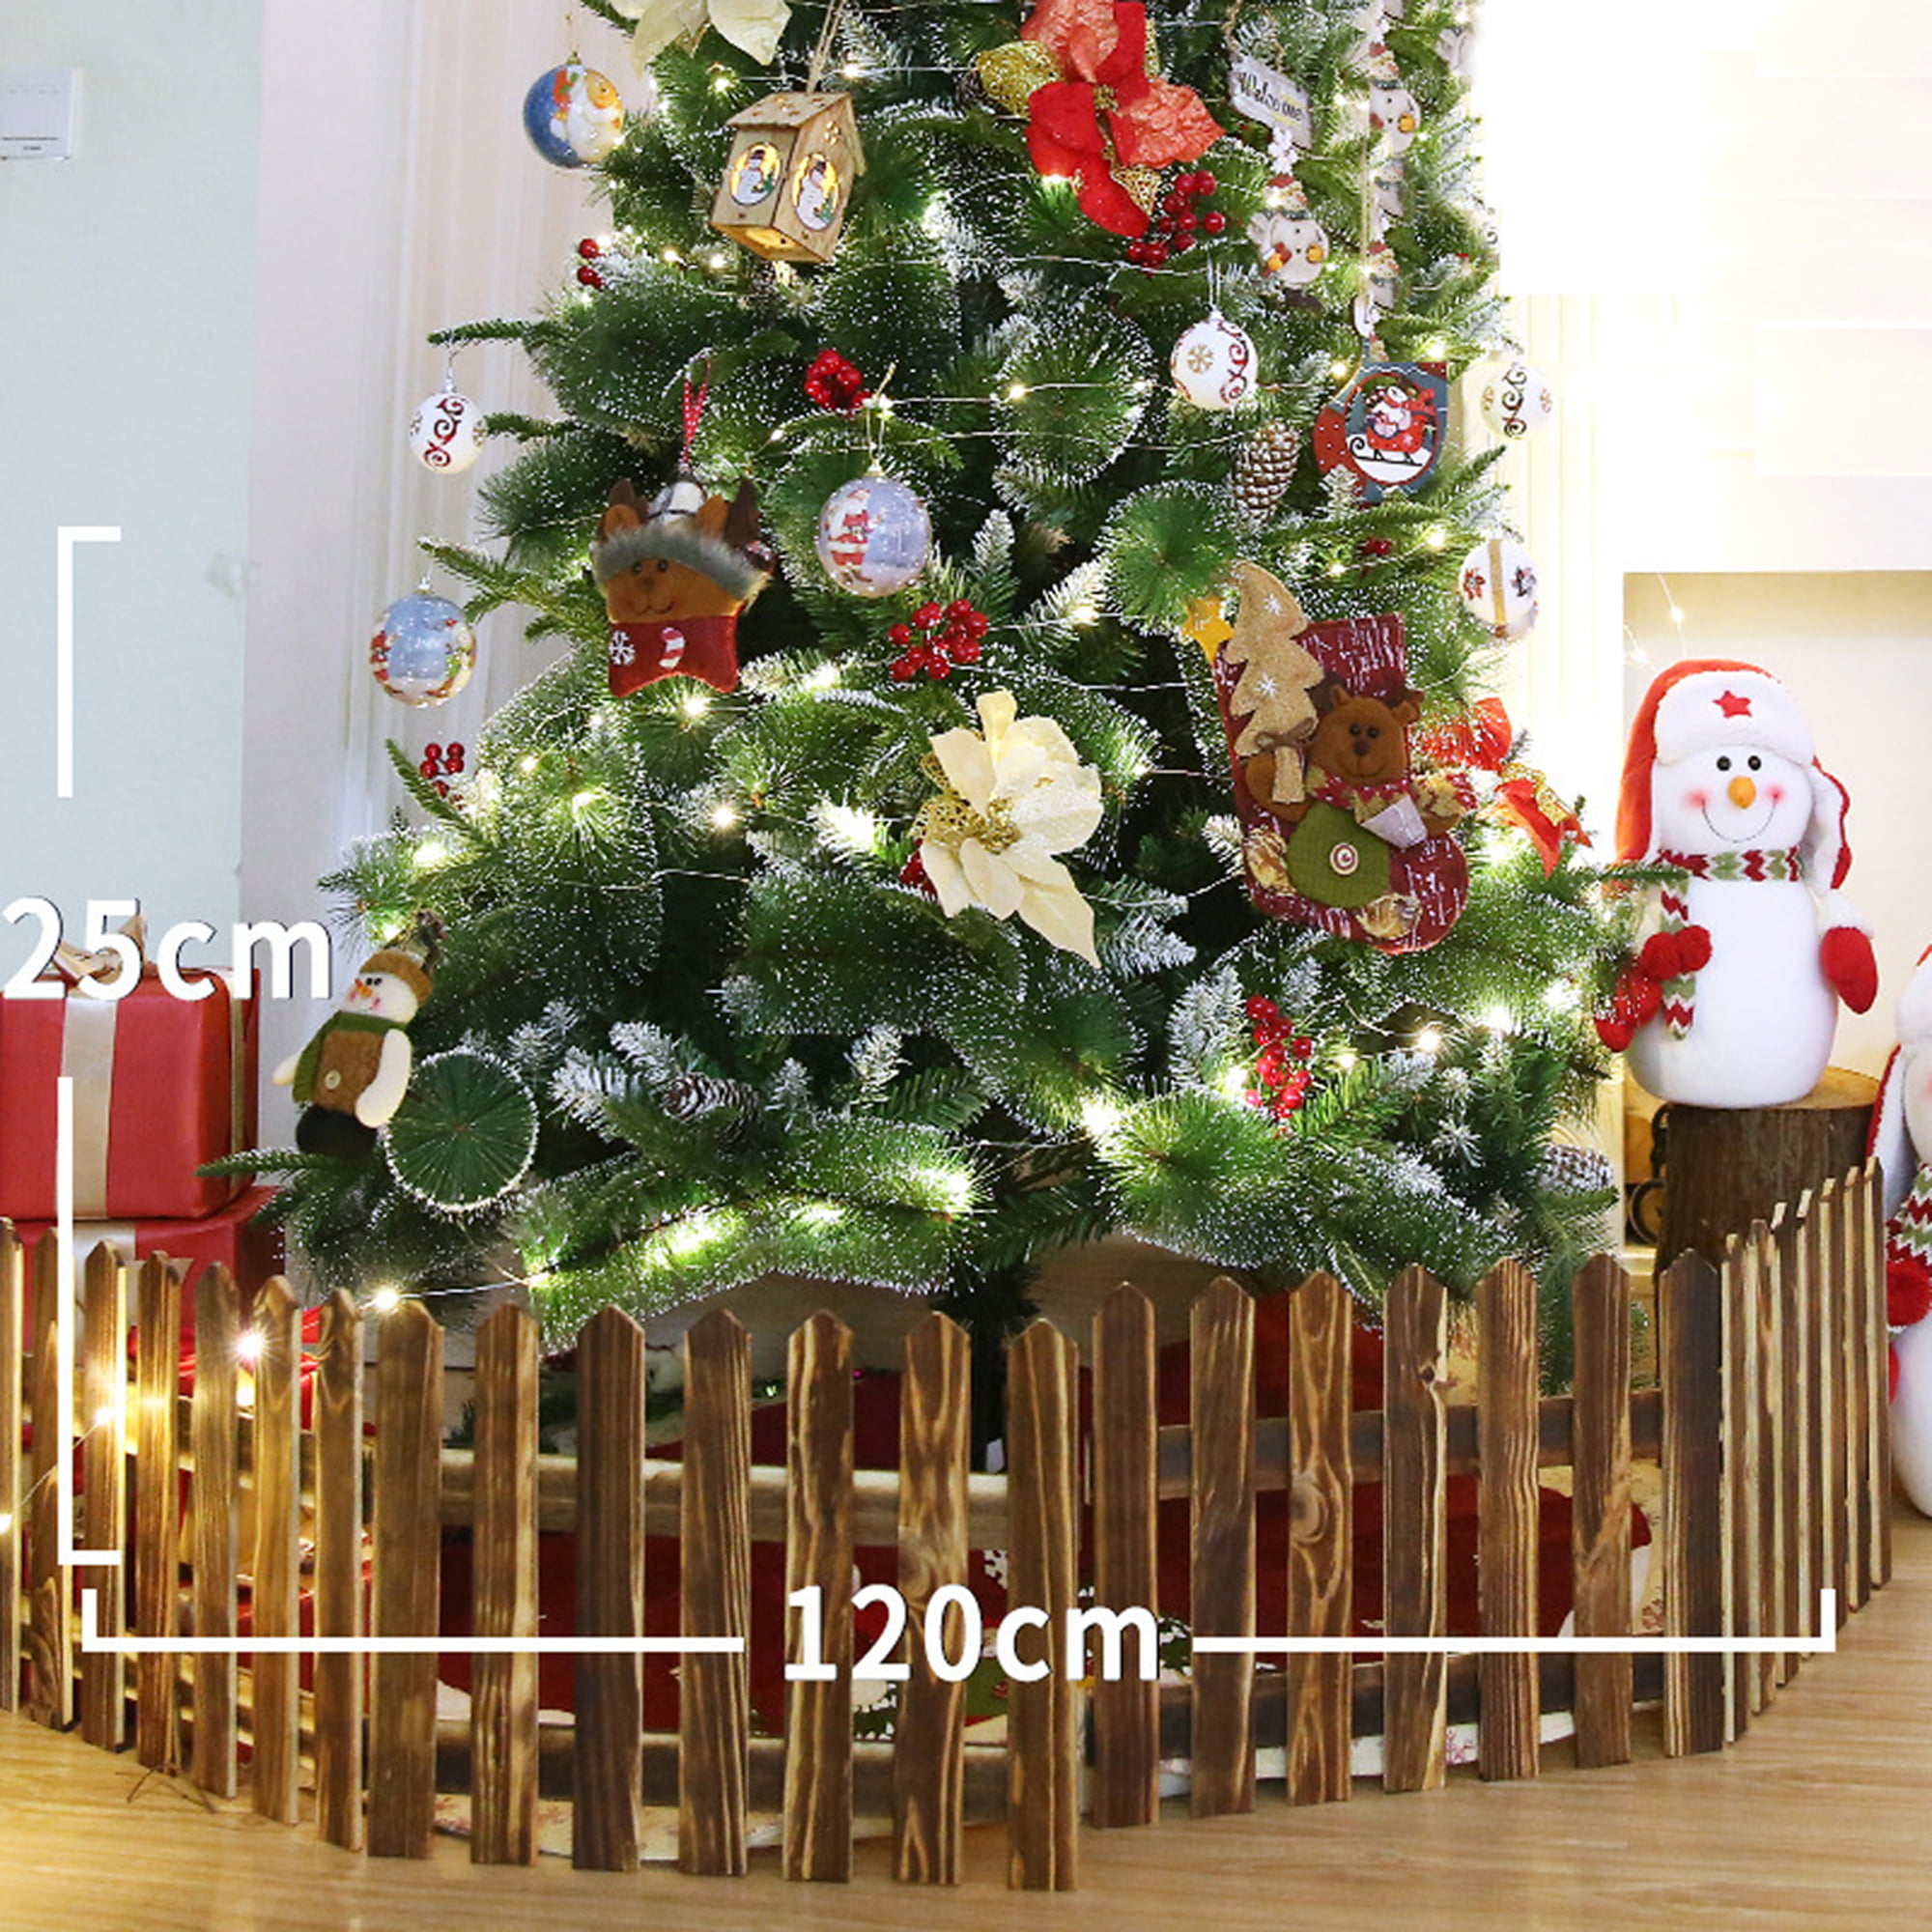 Pack of 20 Christmas Tree Fence Garden Party Wedding Christmas Decoration Fence Decoration for Christmas Tree White Plastic Fence 